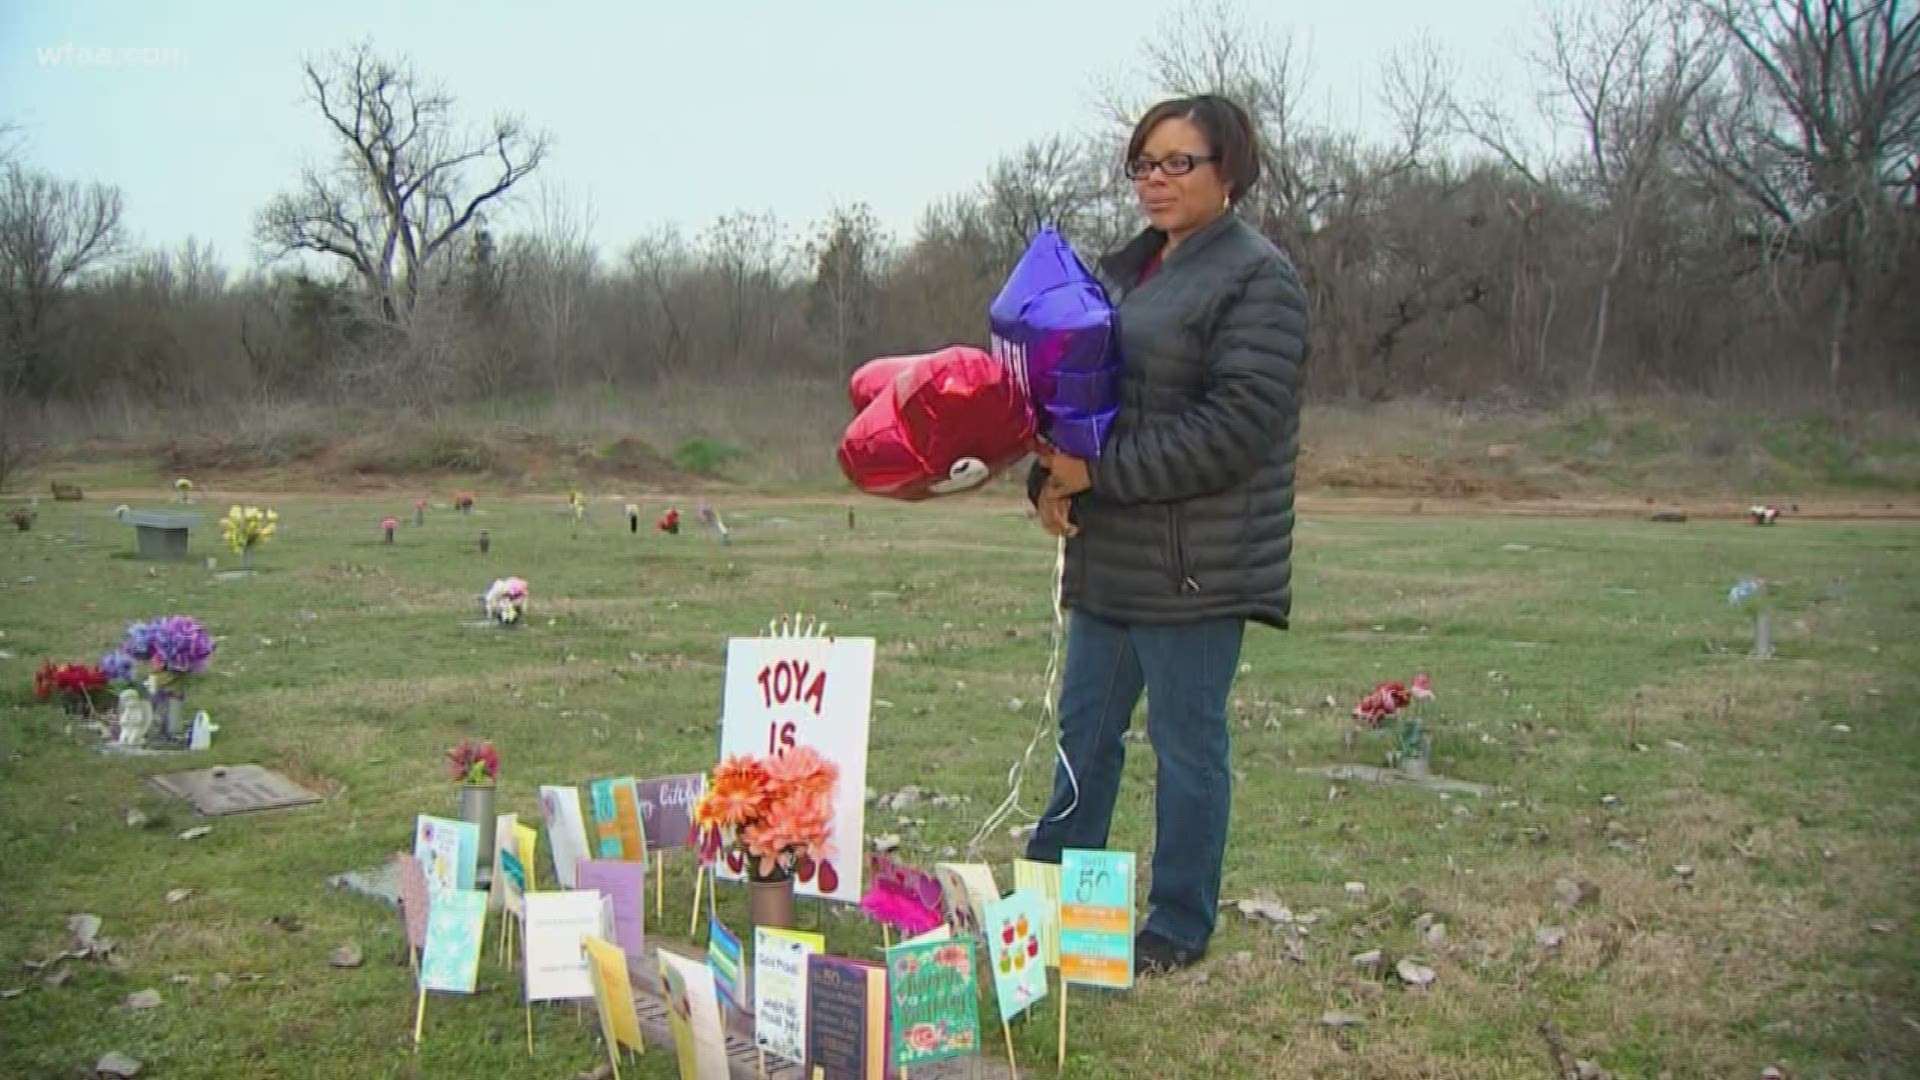 The family of 43-year-old Toya Smith and 17-year-old Tasmia Allen gathered at the mother and daughter's graves for what would have been Smith's 50th birthday.